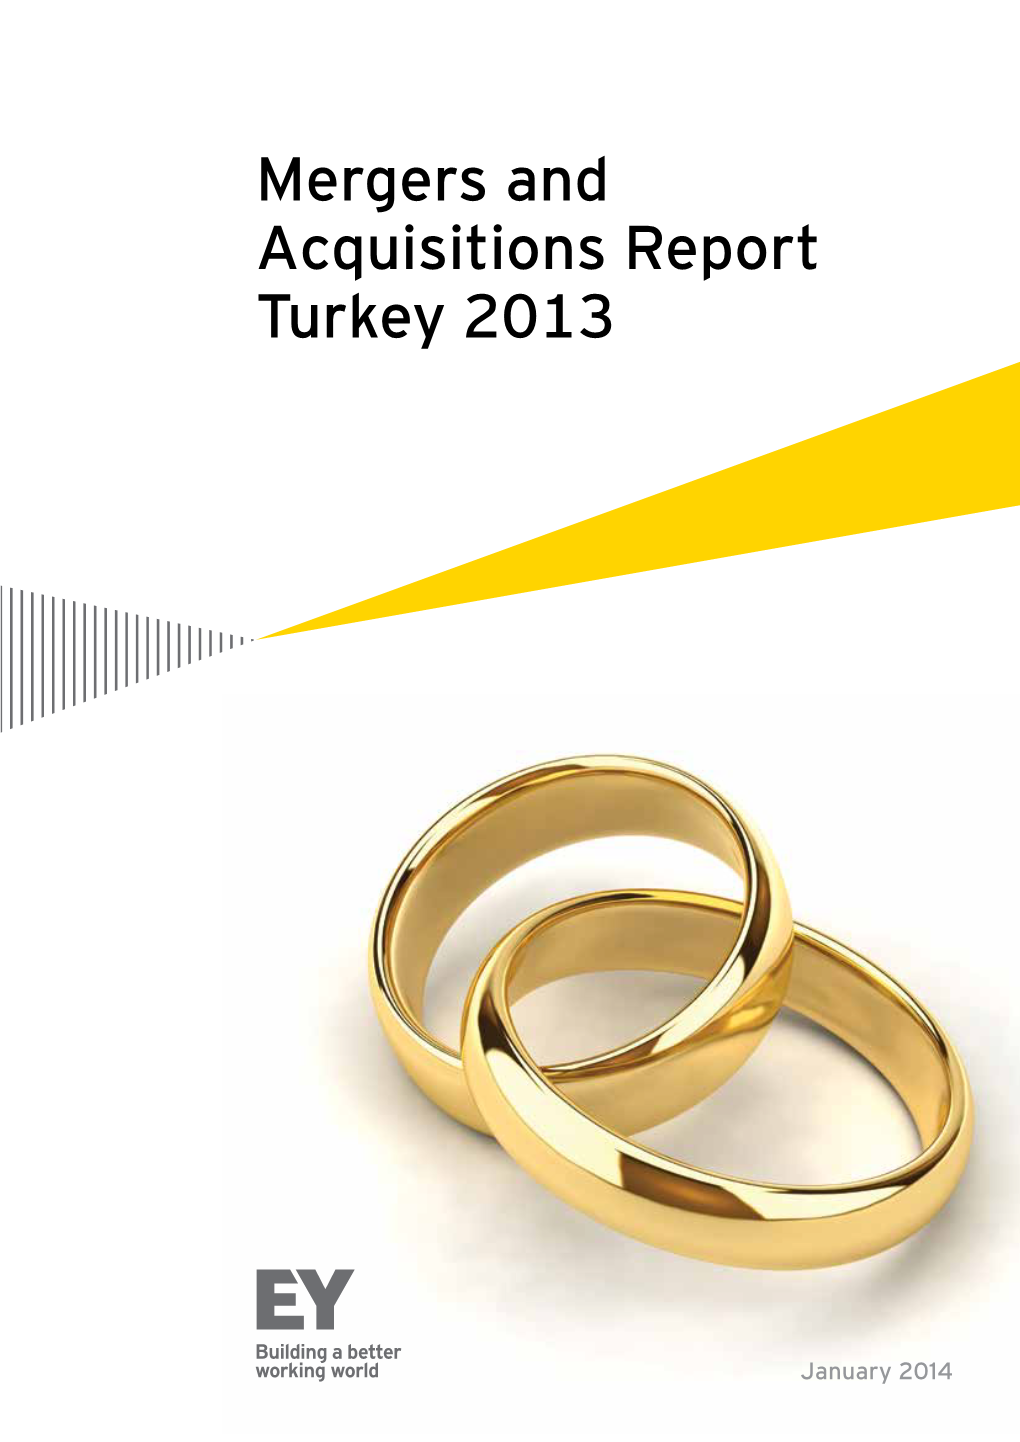 Mergers and Acquisitions Report Turkey 2013